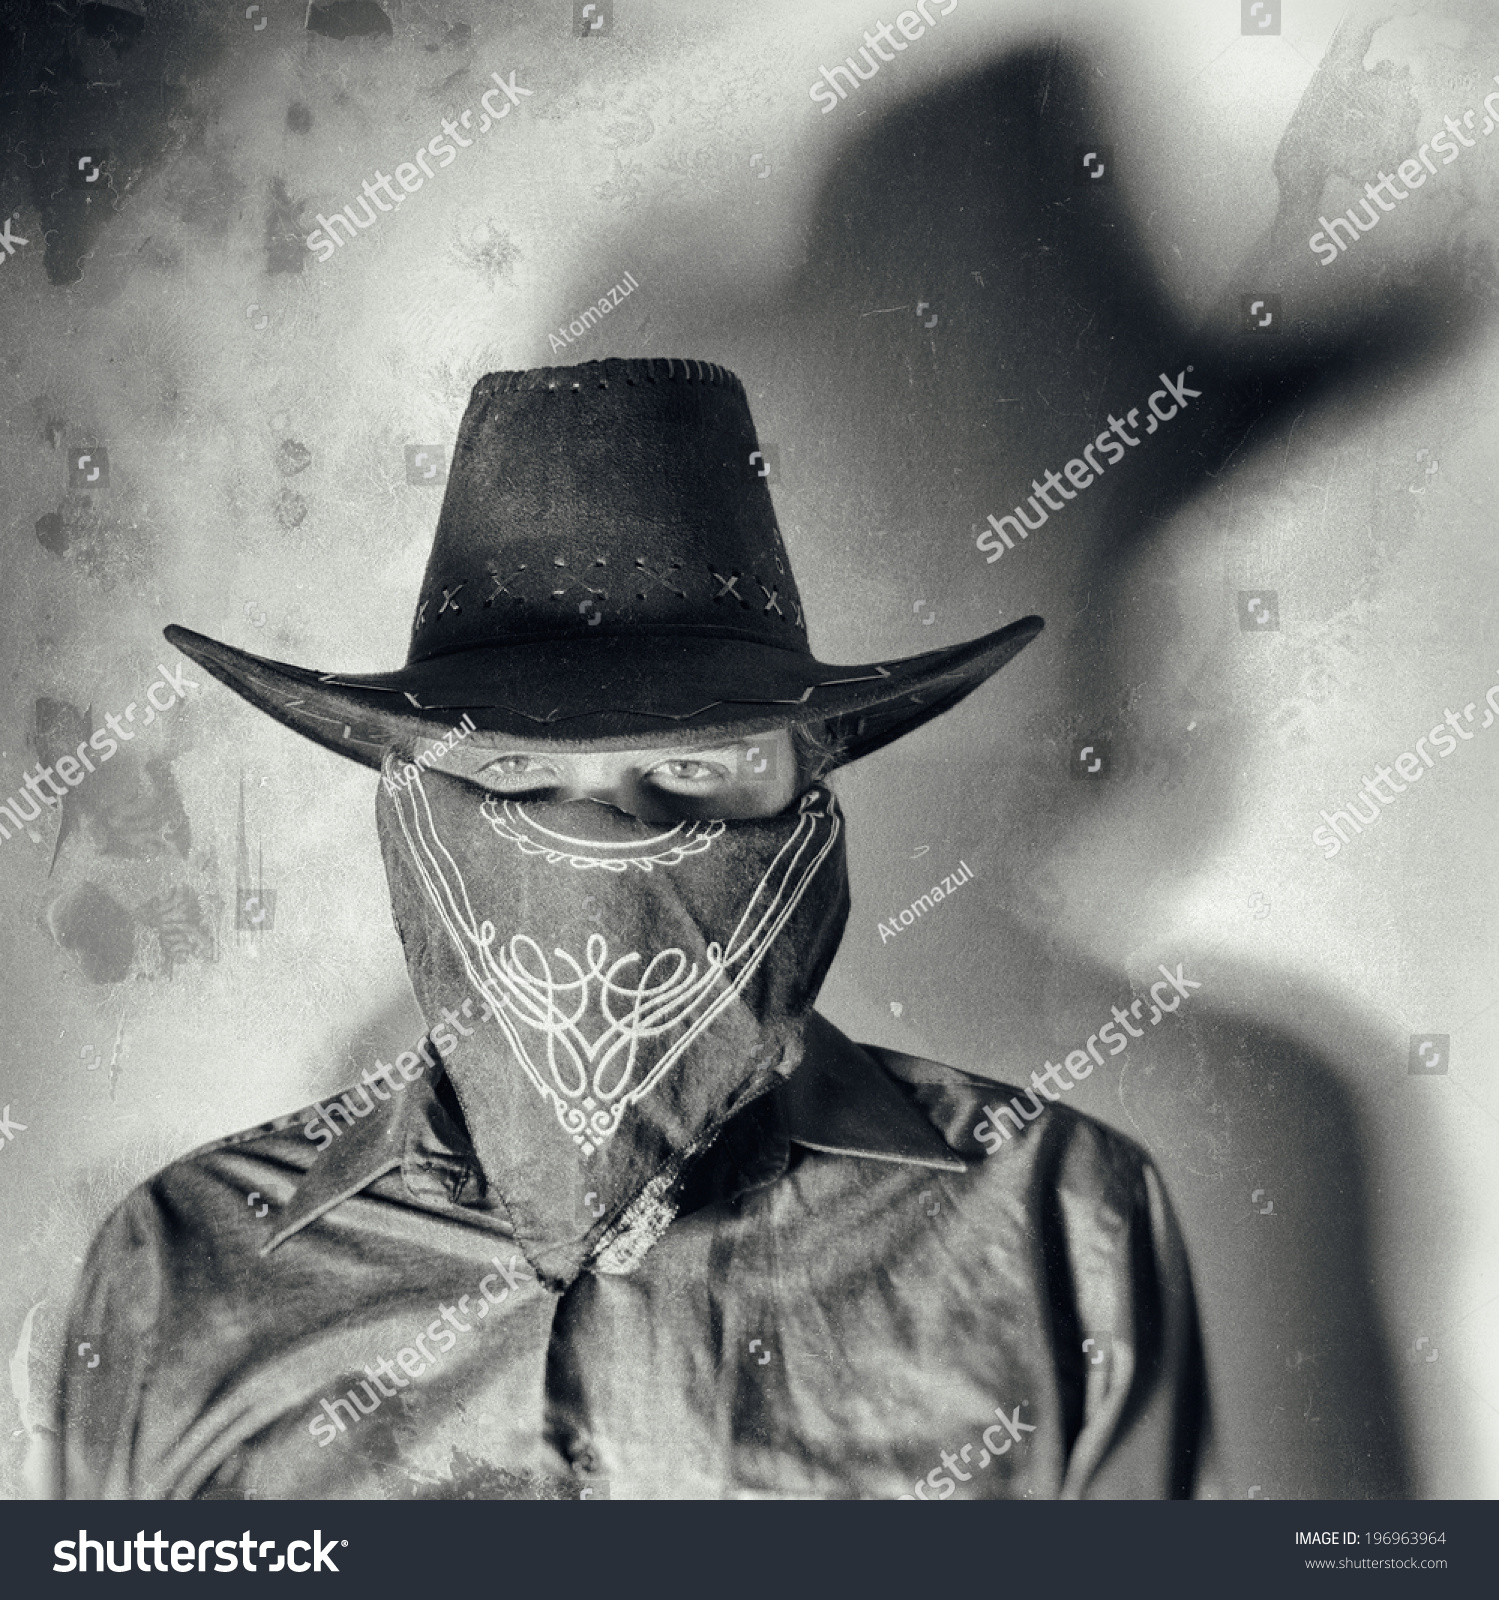 Old West Bandit. Old west bandit outlaw with covered face and cowboy hat, edited in vintage film style. #196963964